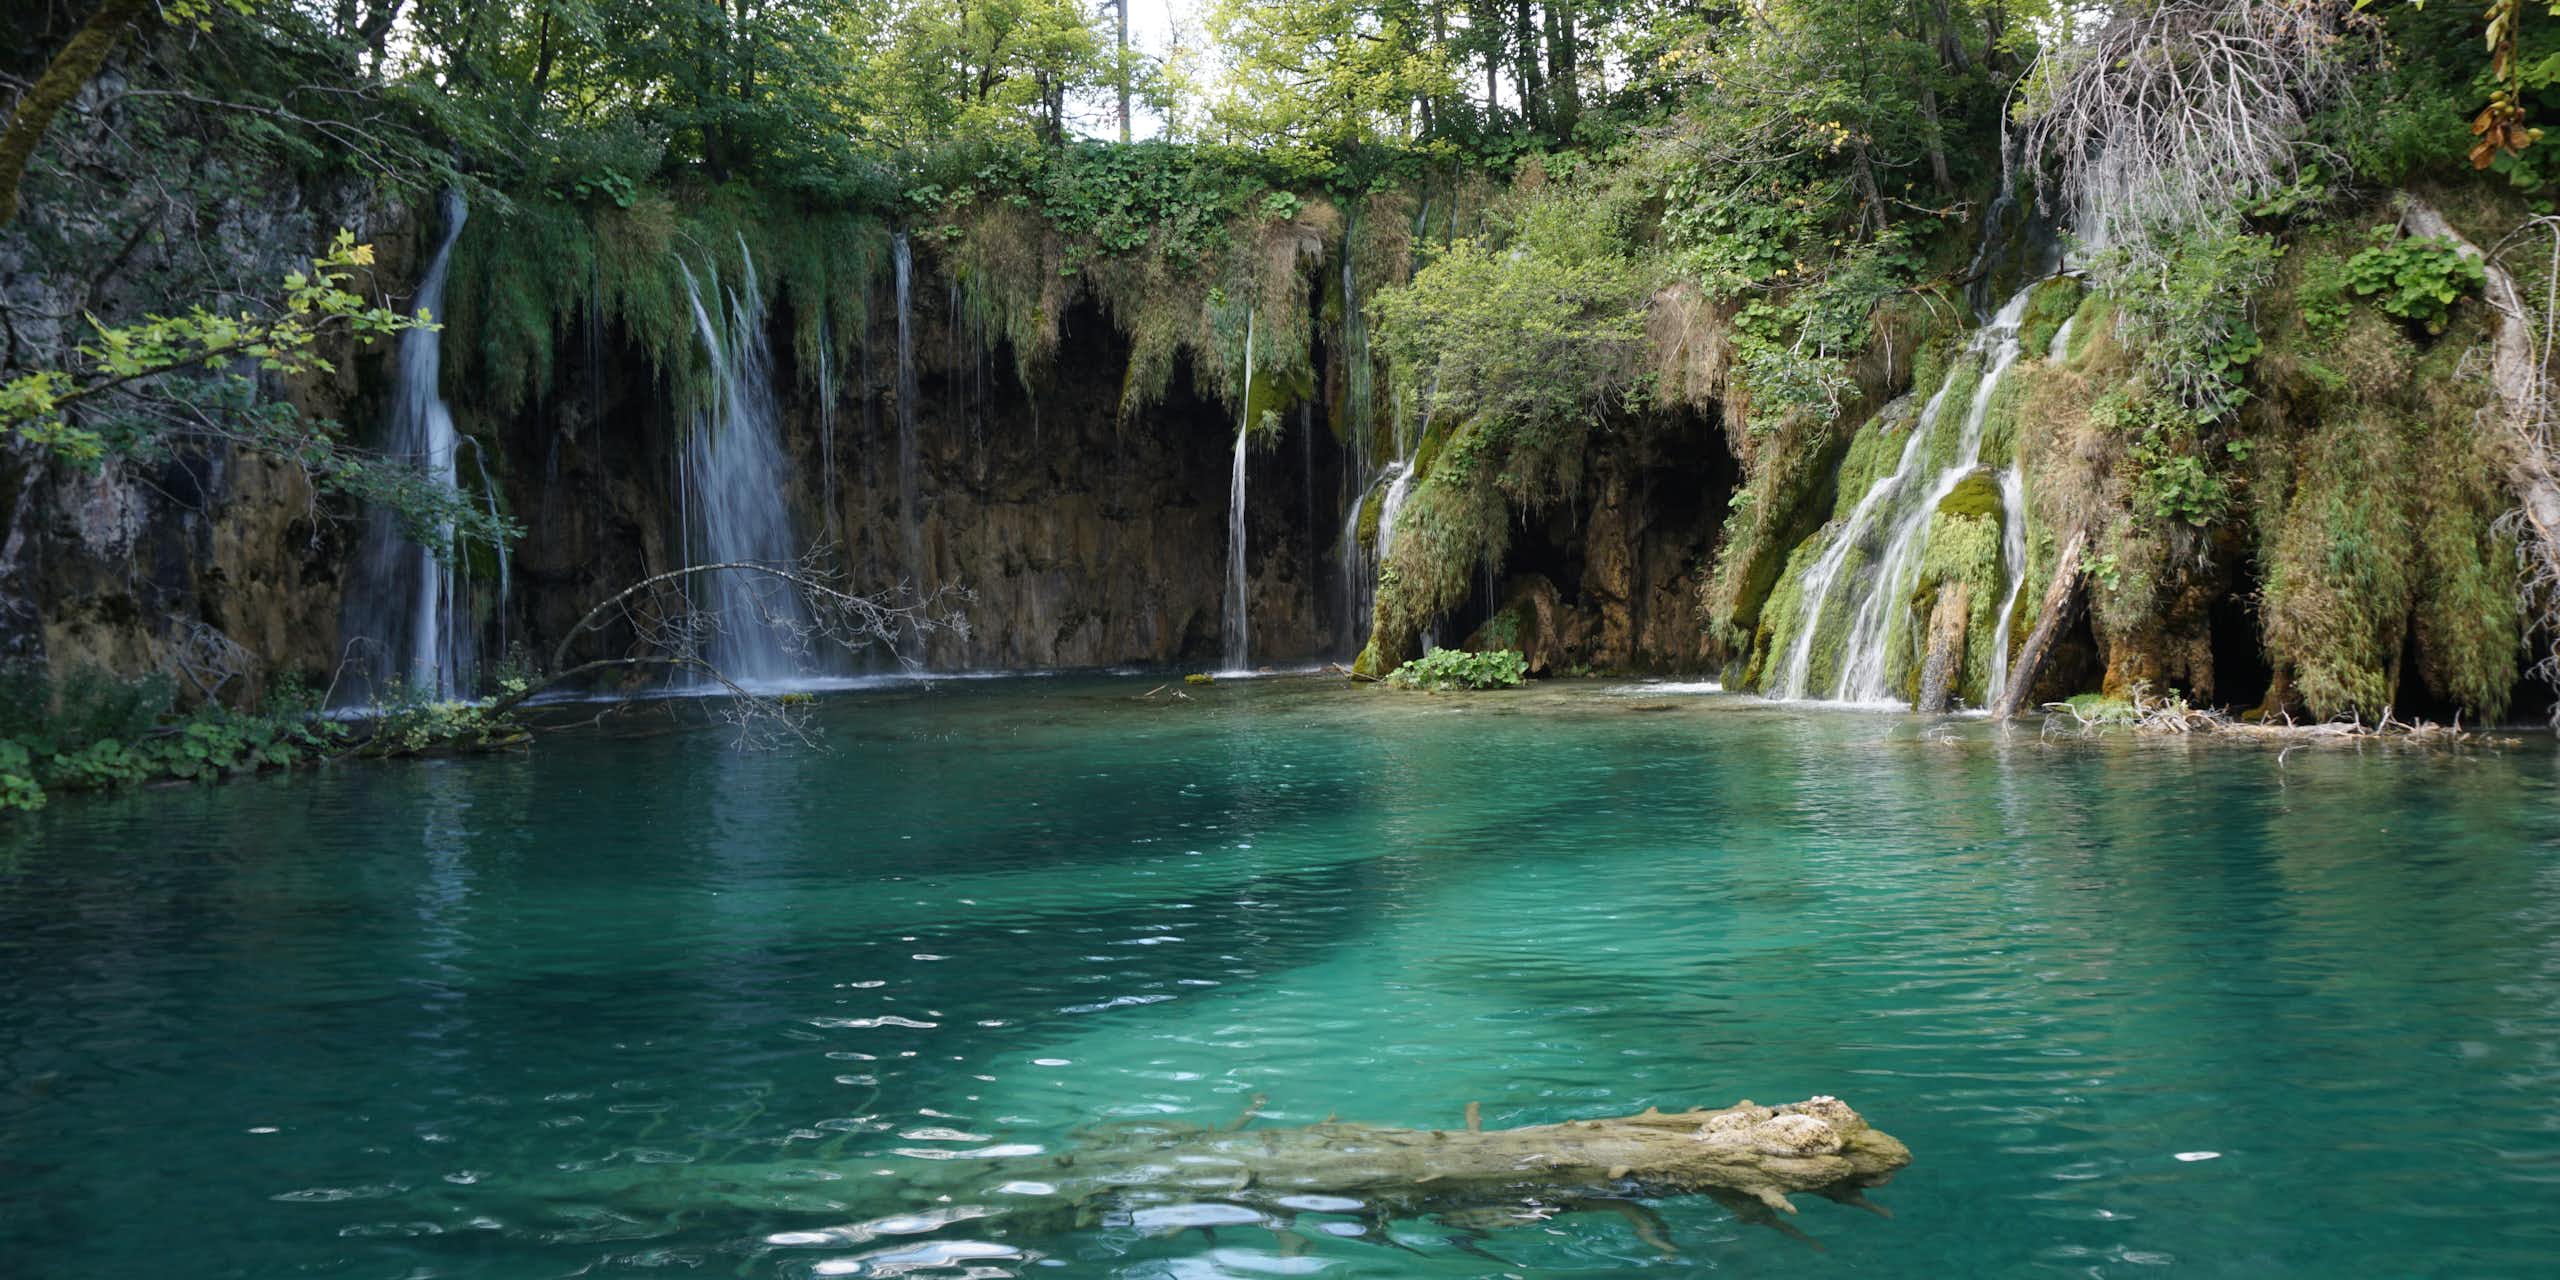 A turquoise lake with streams of water falling into it.